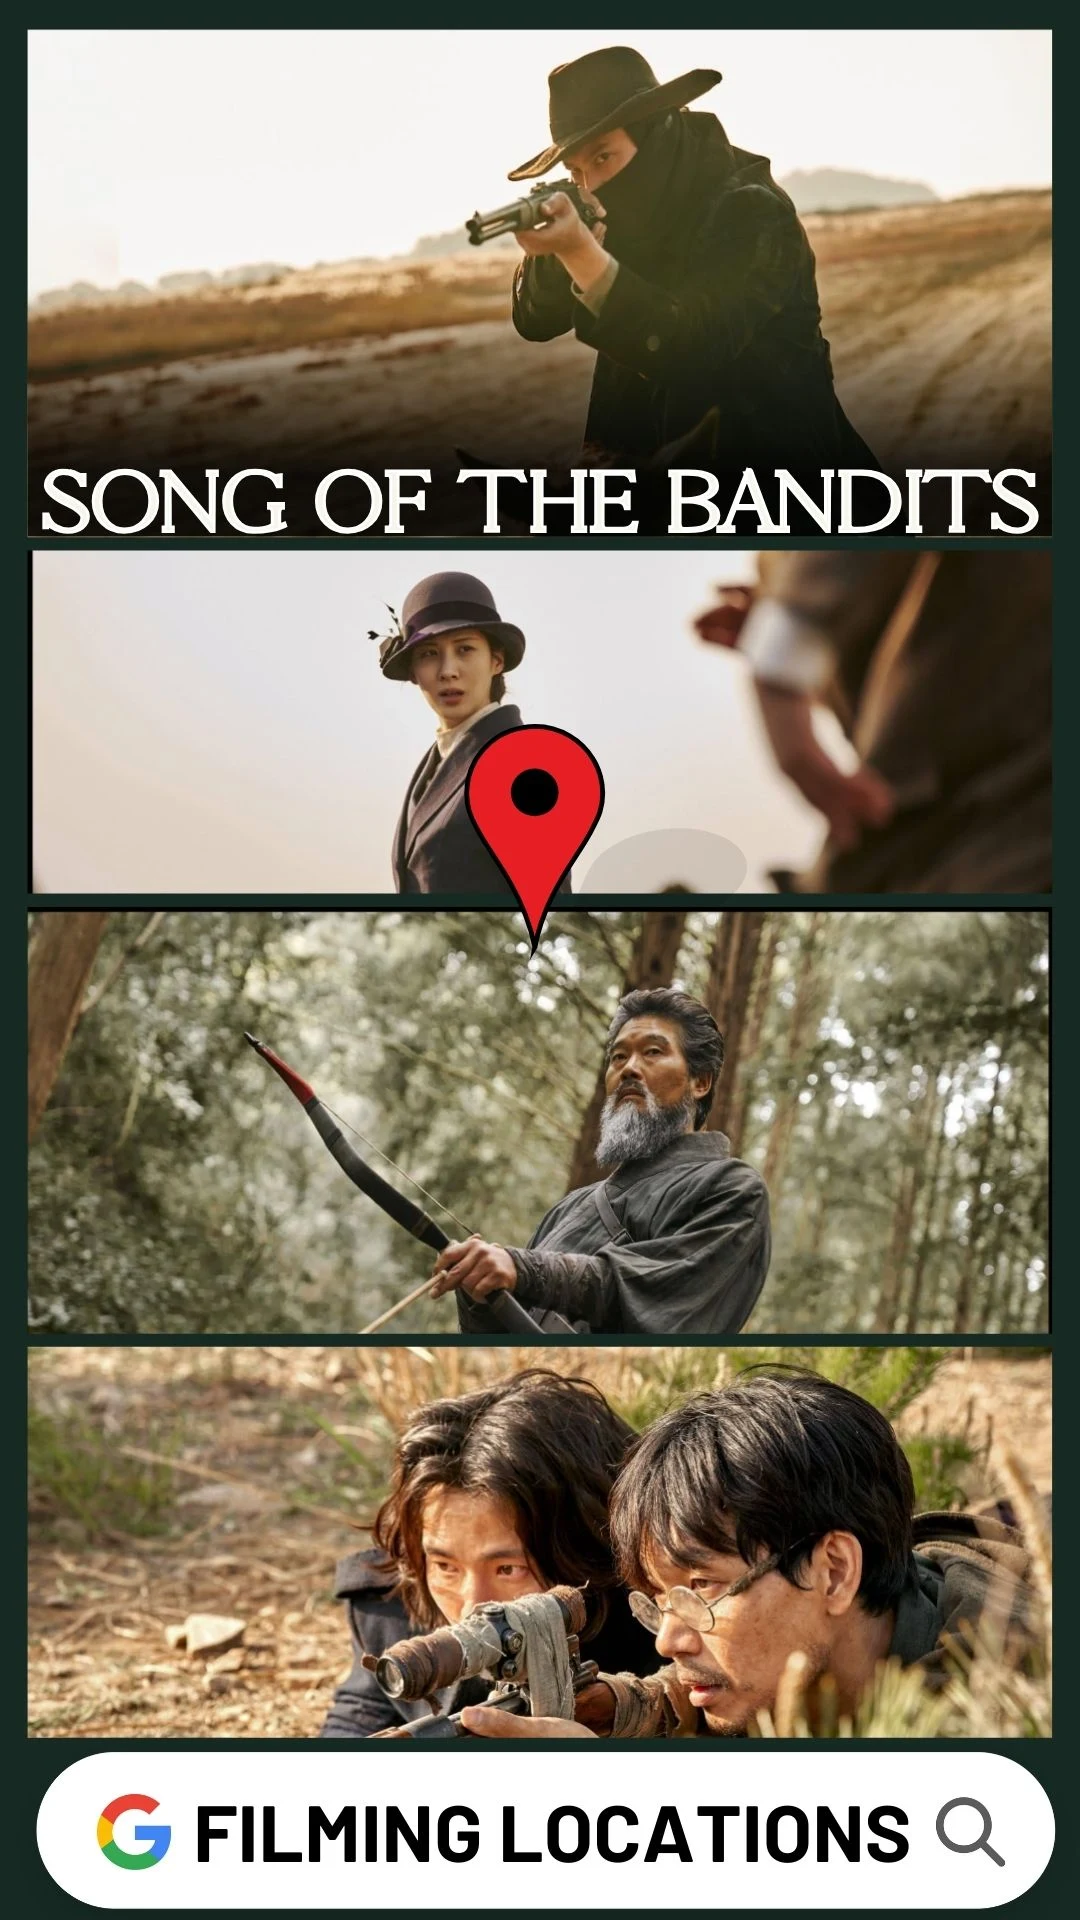 Song of the Bandits Filming Locations